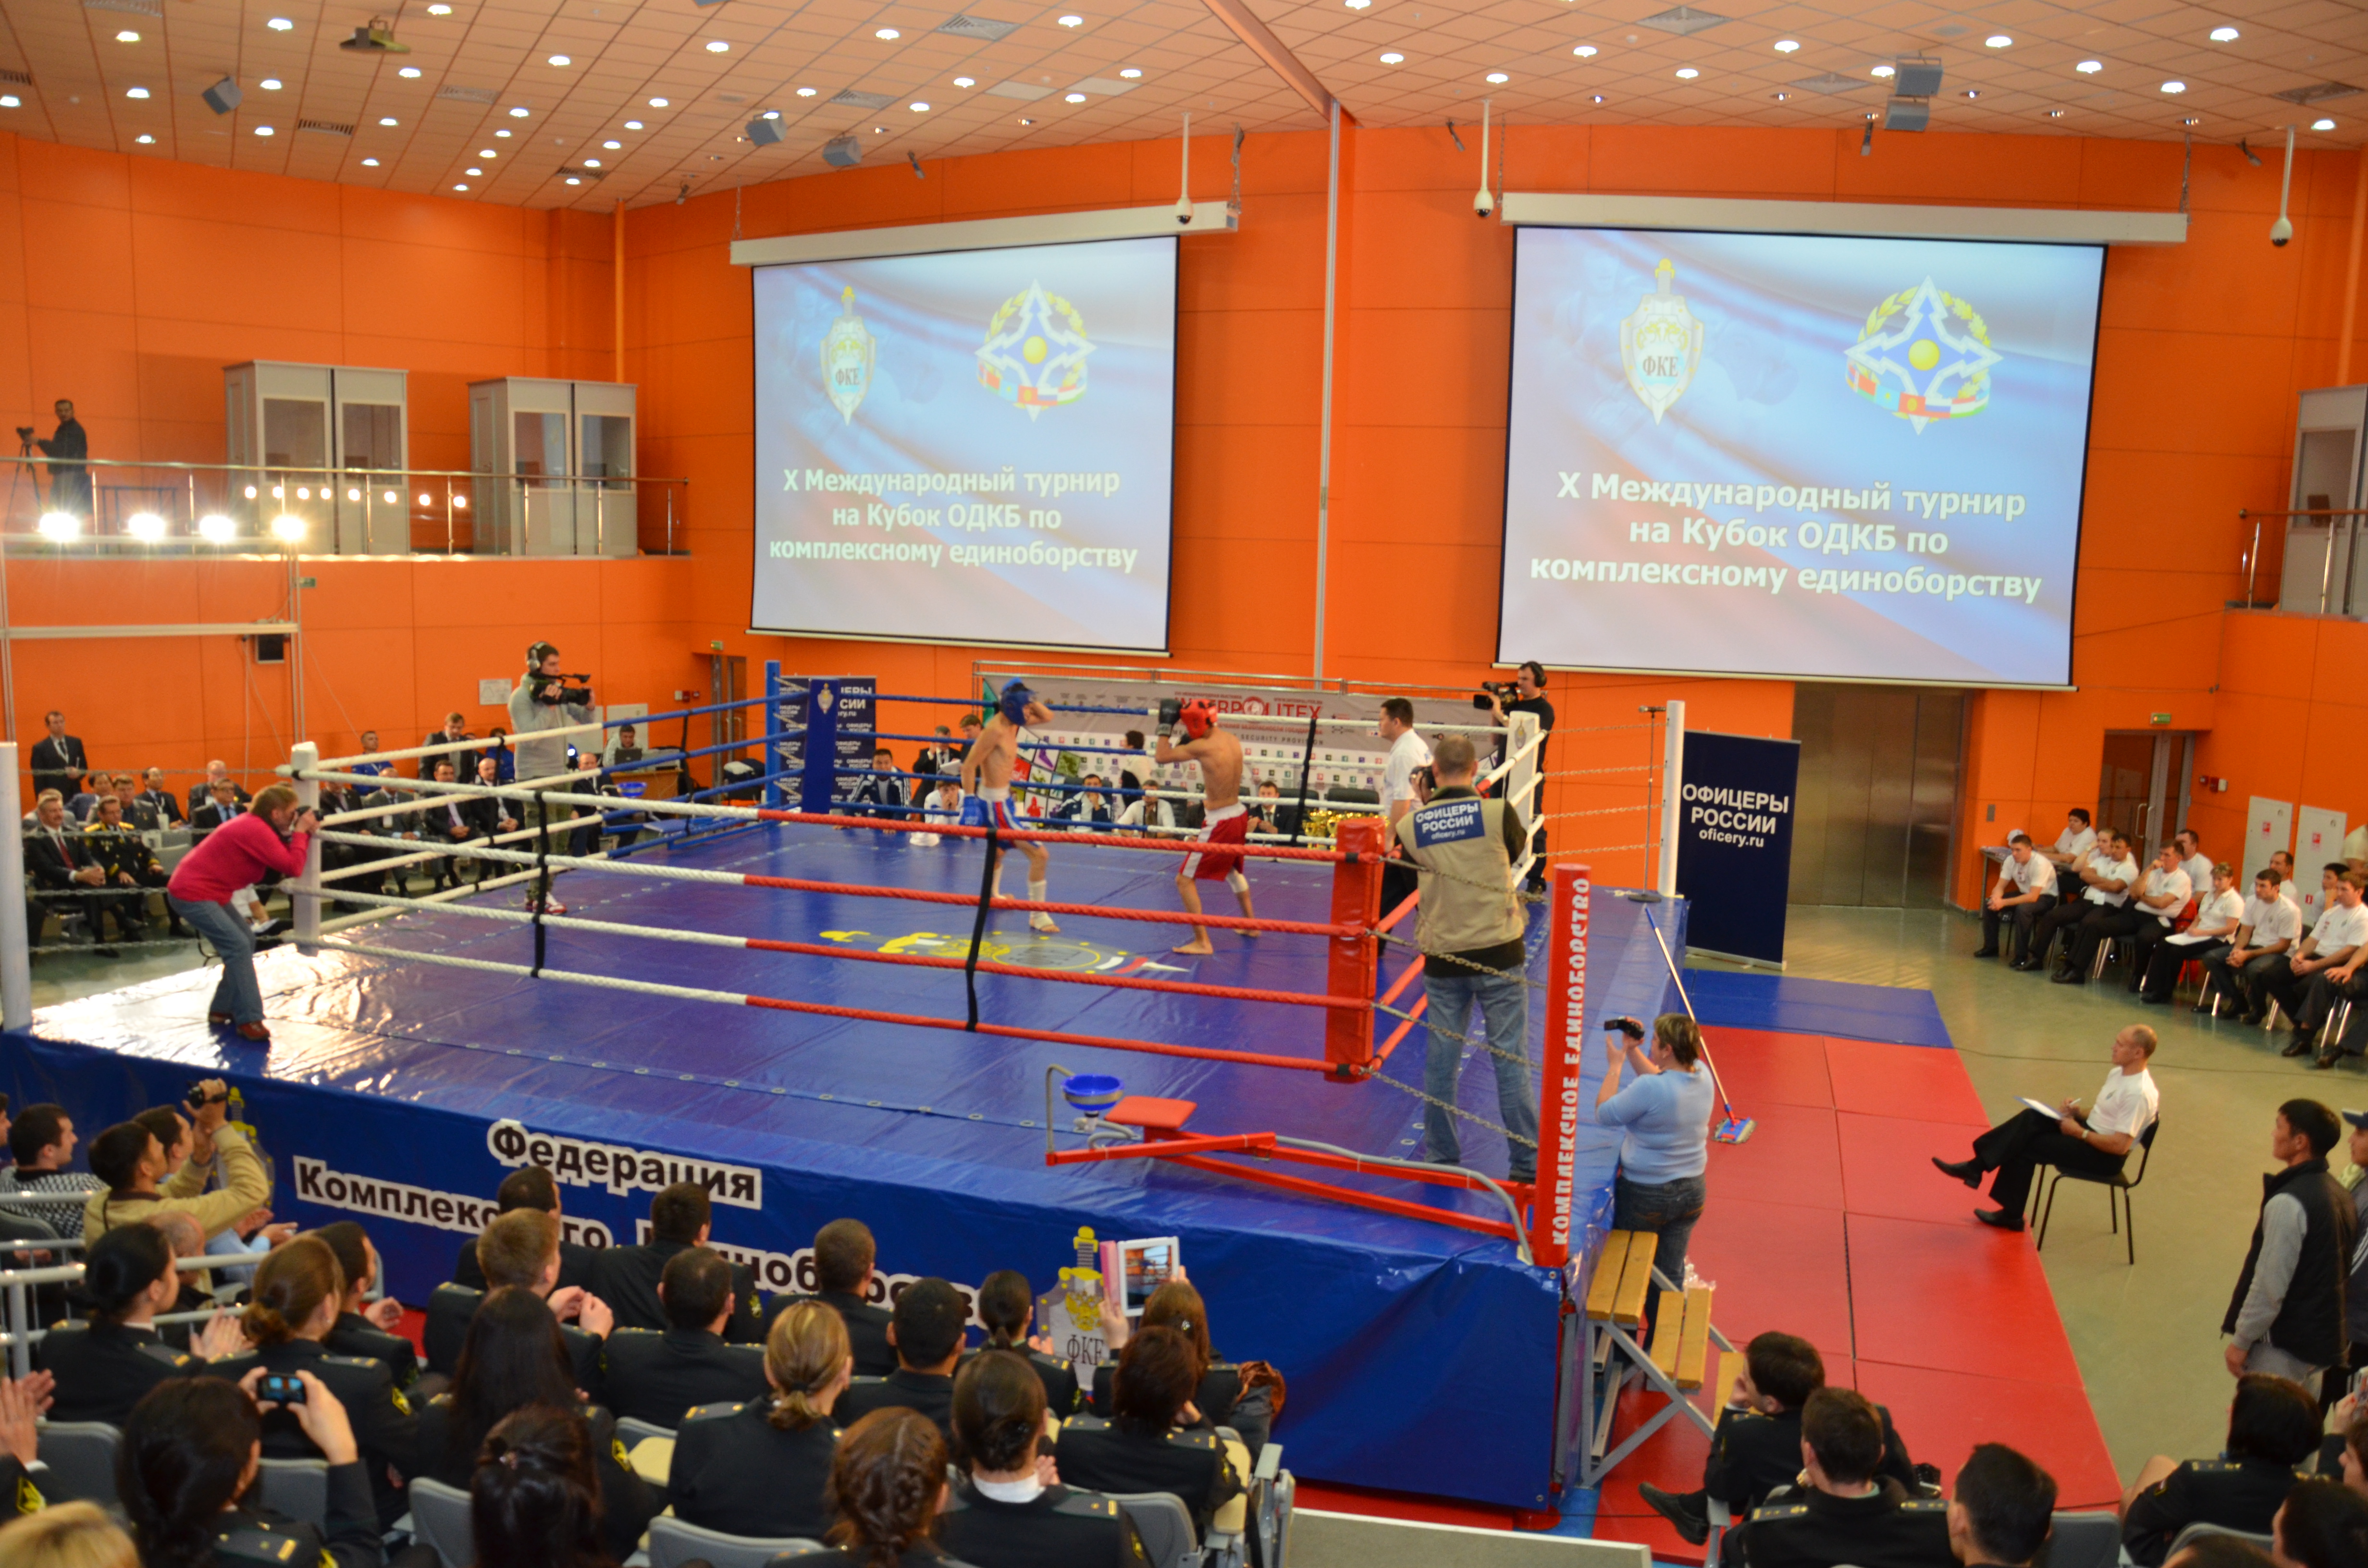 The team of the Russian Federation took the first in the final of the X International Complex Martial Arts Tournament among employees of special forces of the security agencies of the CSTO member states, which was held as part of the XVI International Exh